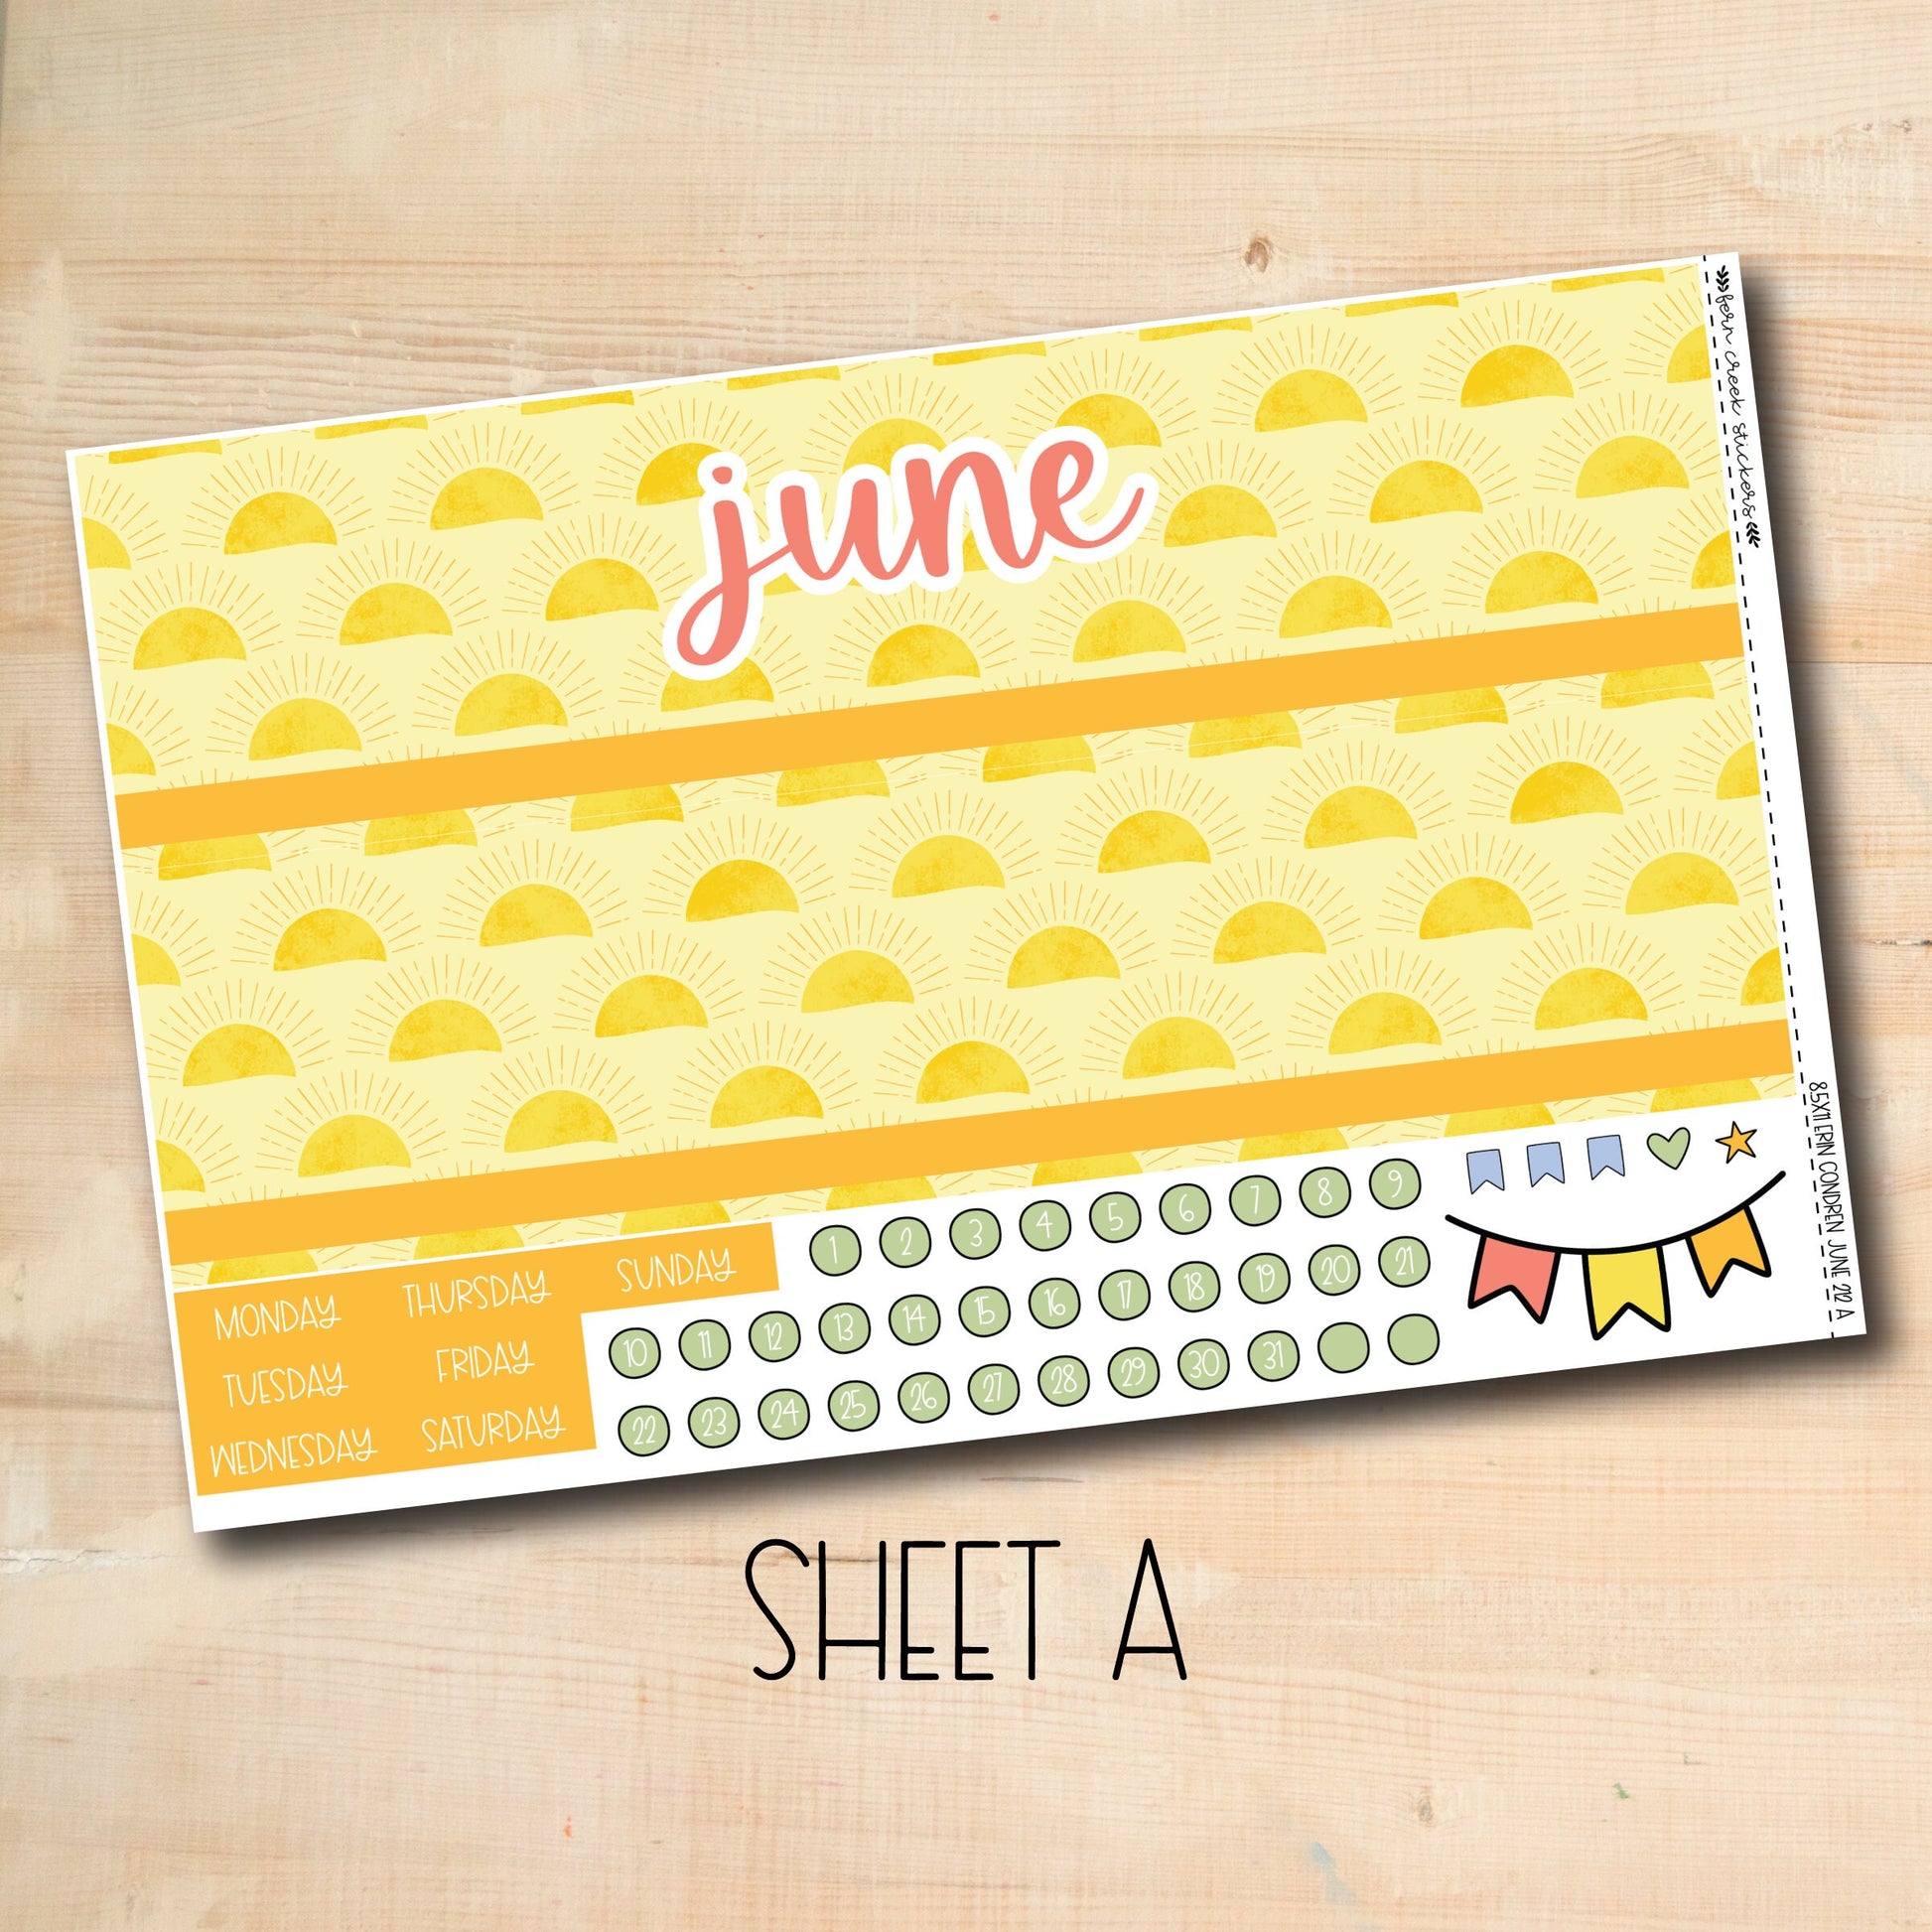 a yellow and white paper with the word june on it